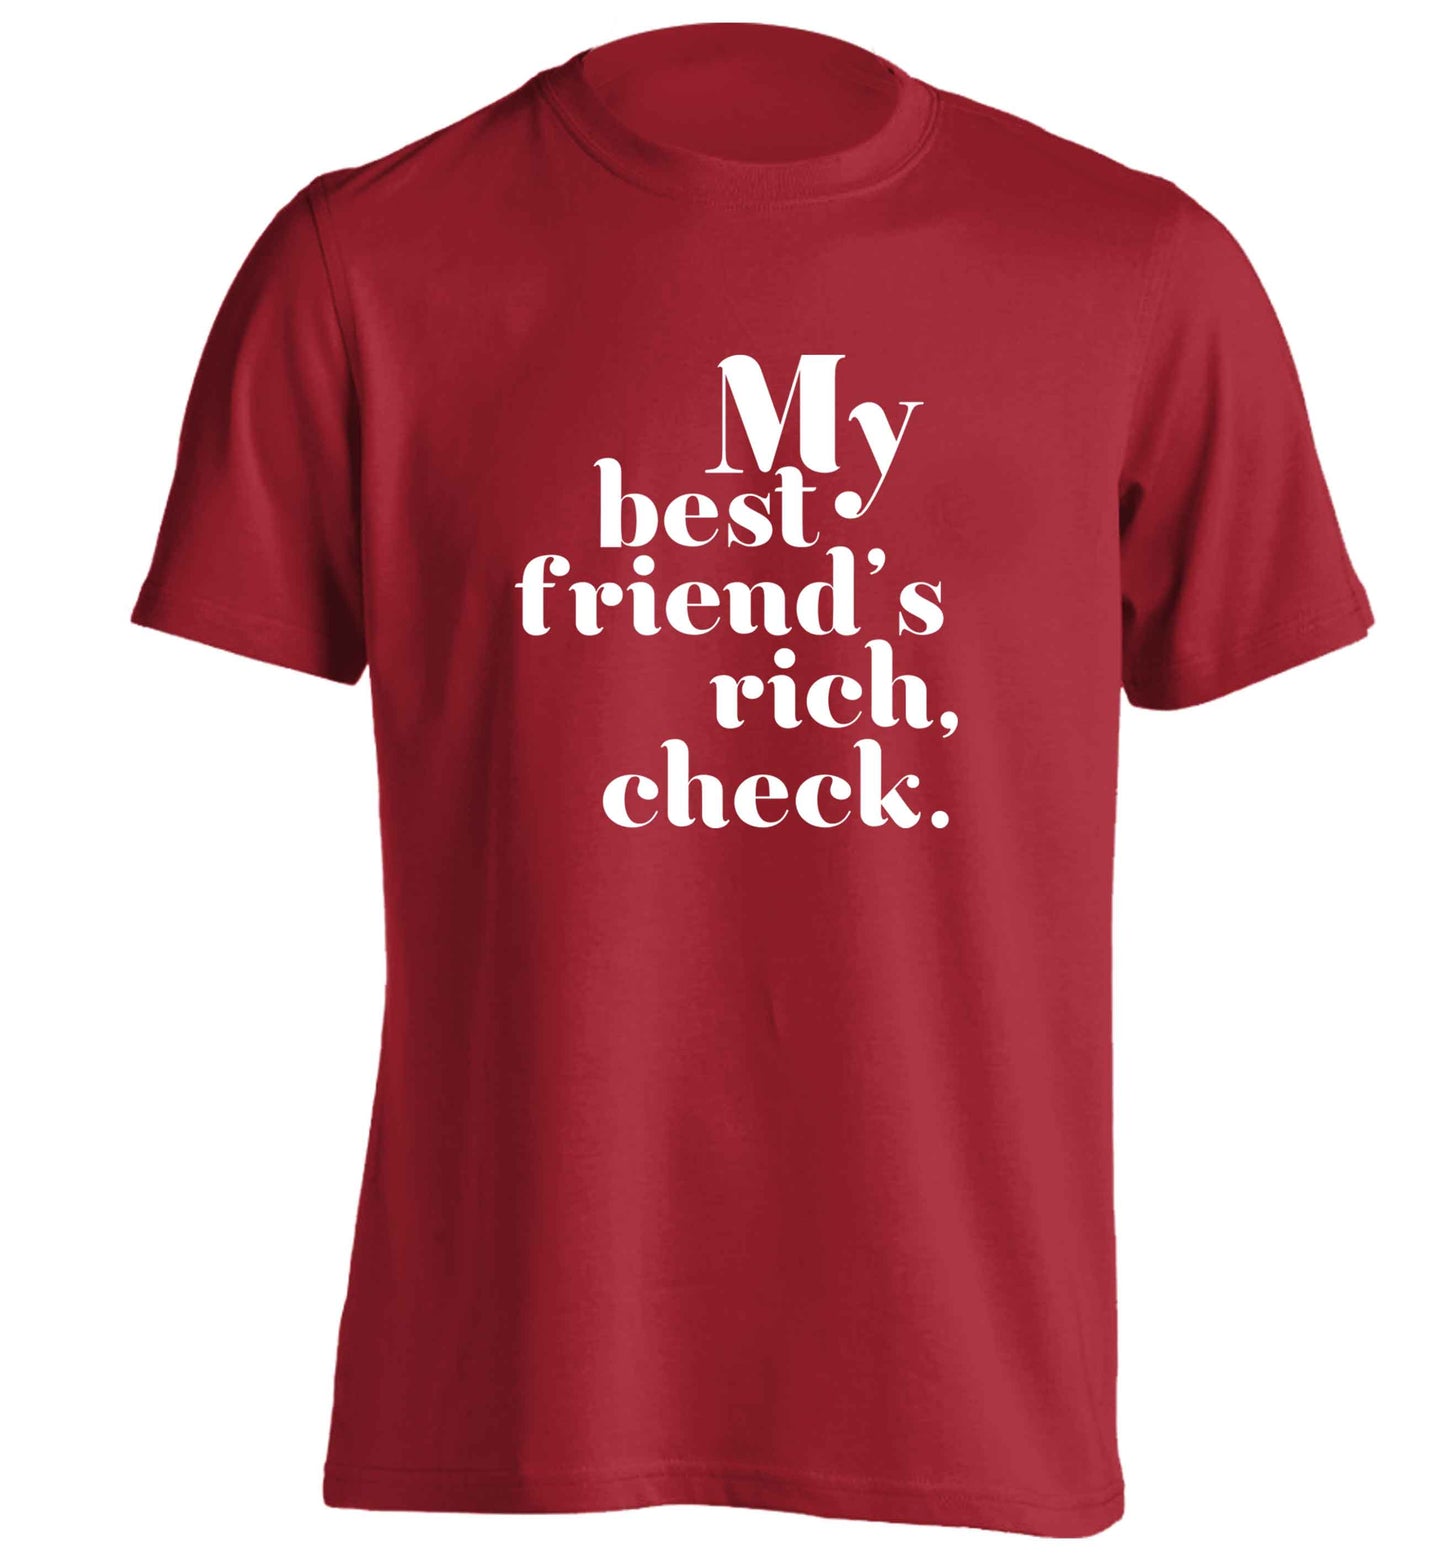 Got a rich best friend? Why not ask them to get you this, just let us  know and we'll tripple the price ;)  adults unisex red Tshirt 2XL